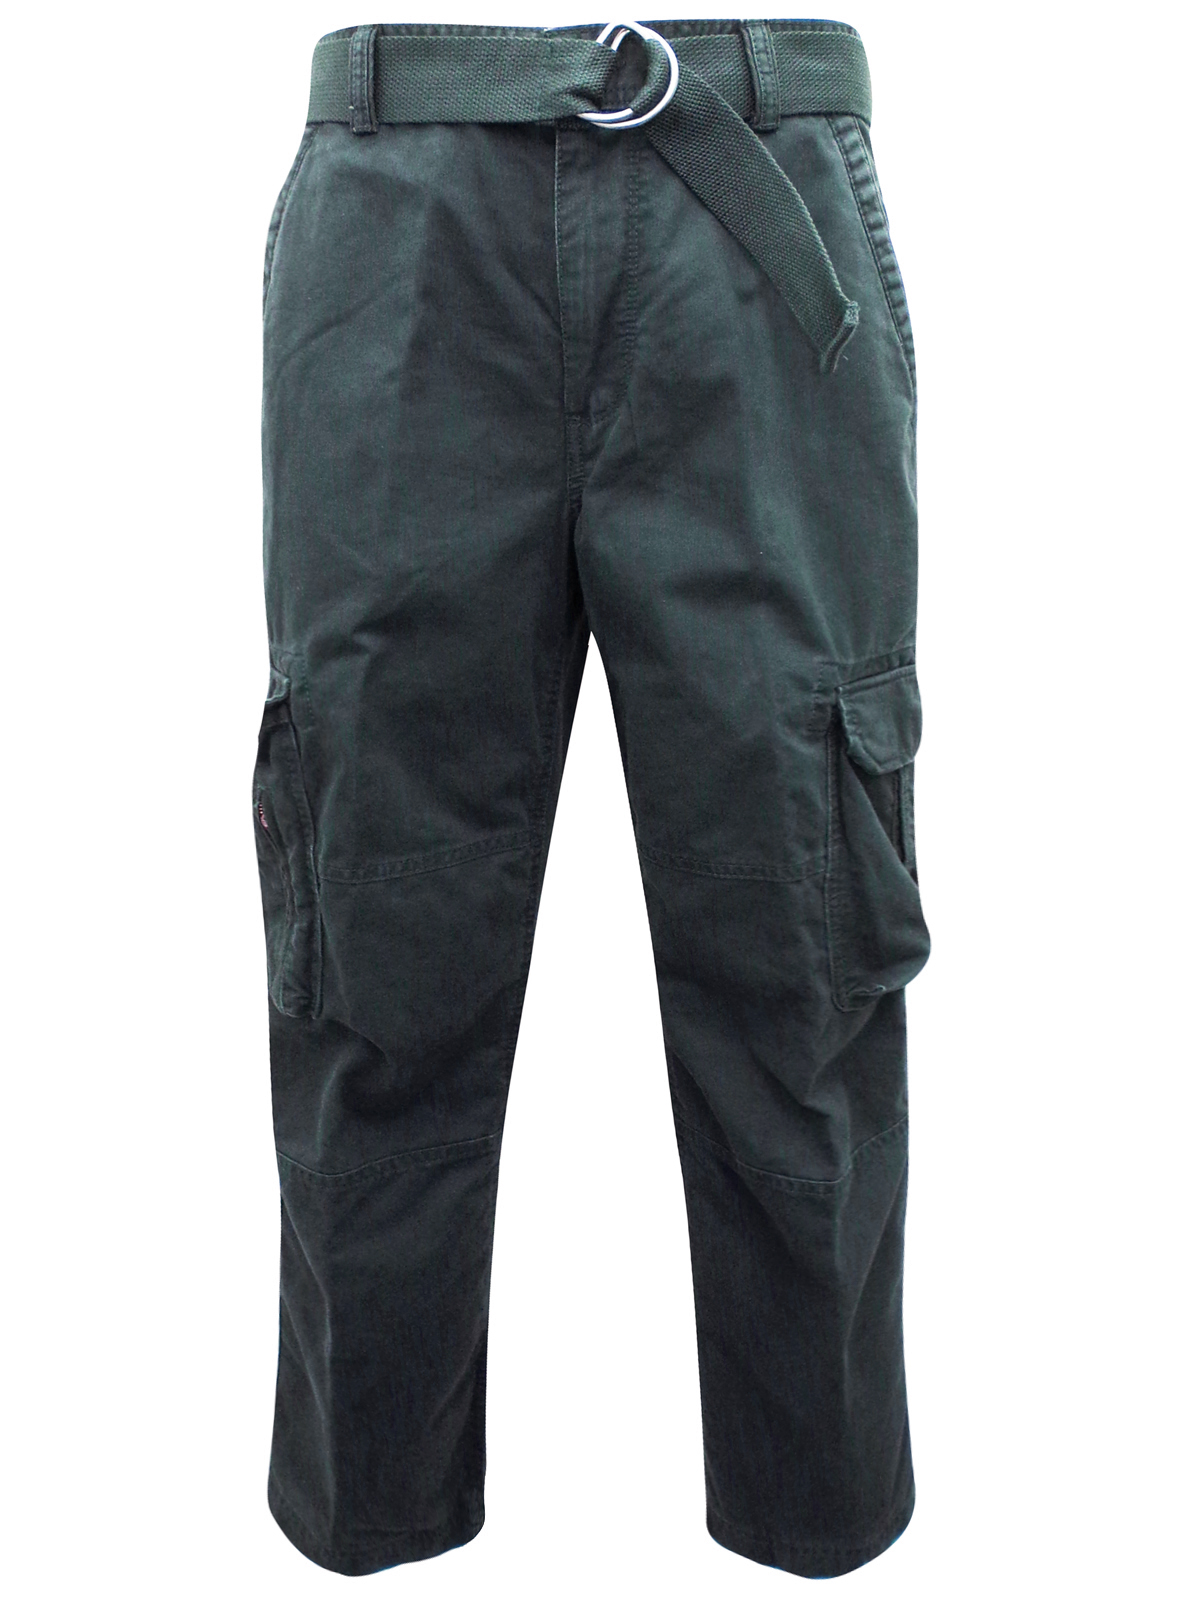 Marks and Spencer - - M&5 N0rth C0ast TEAL Pure Cotton Cargo Trousers ...